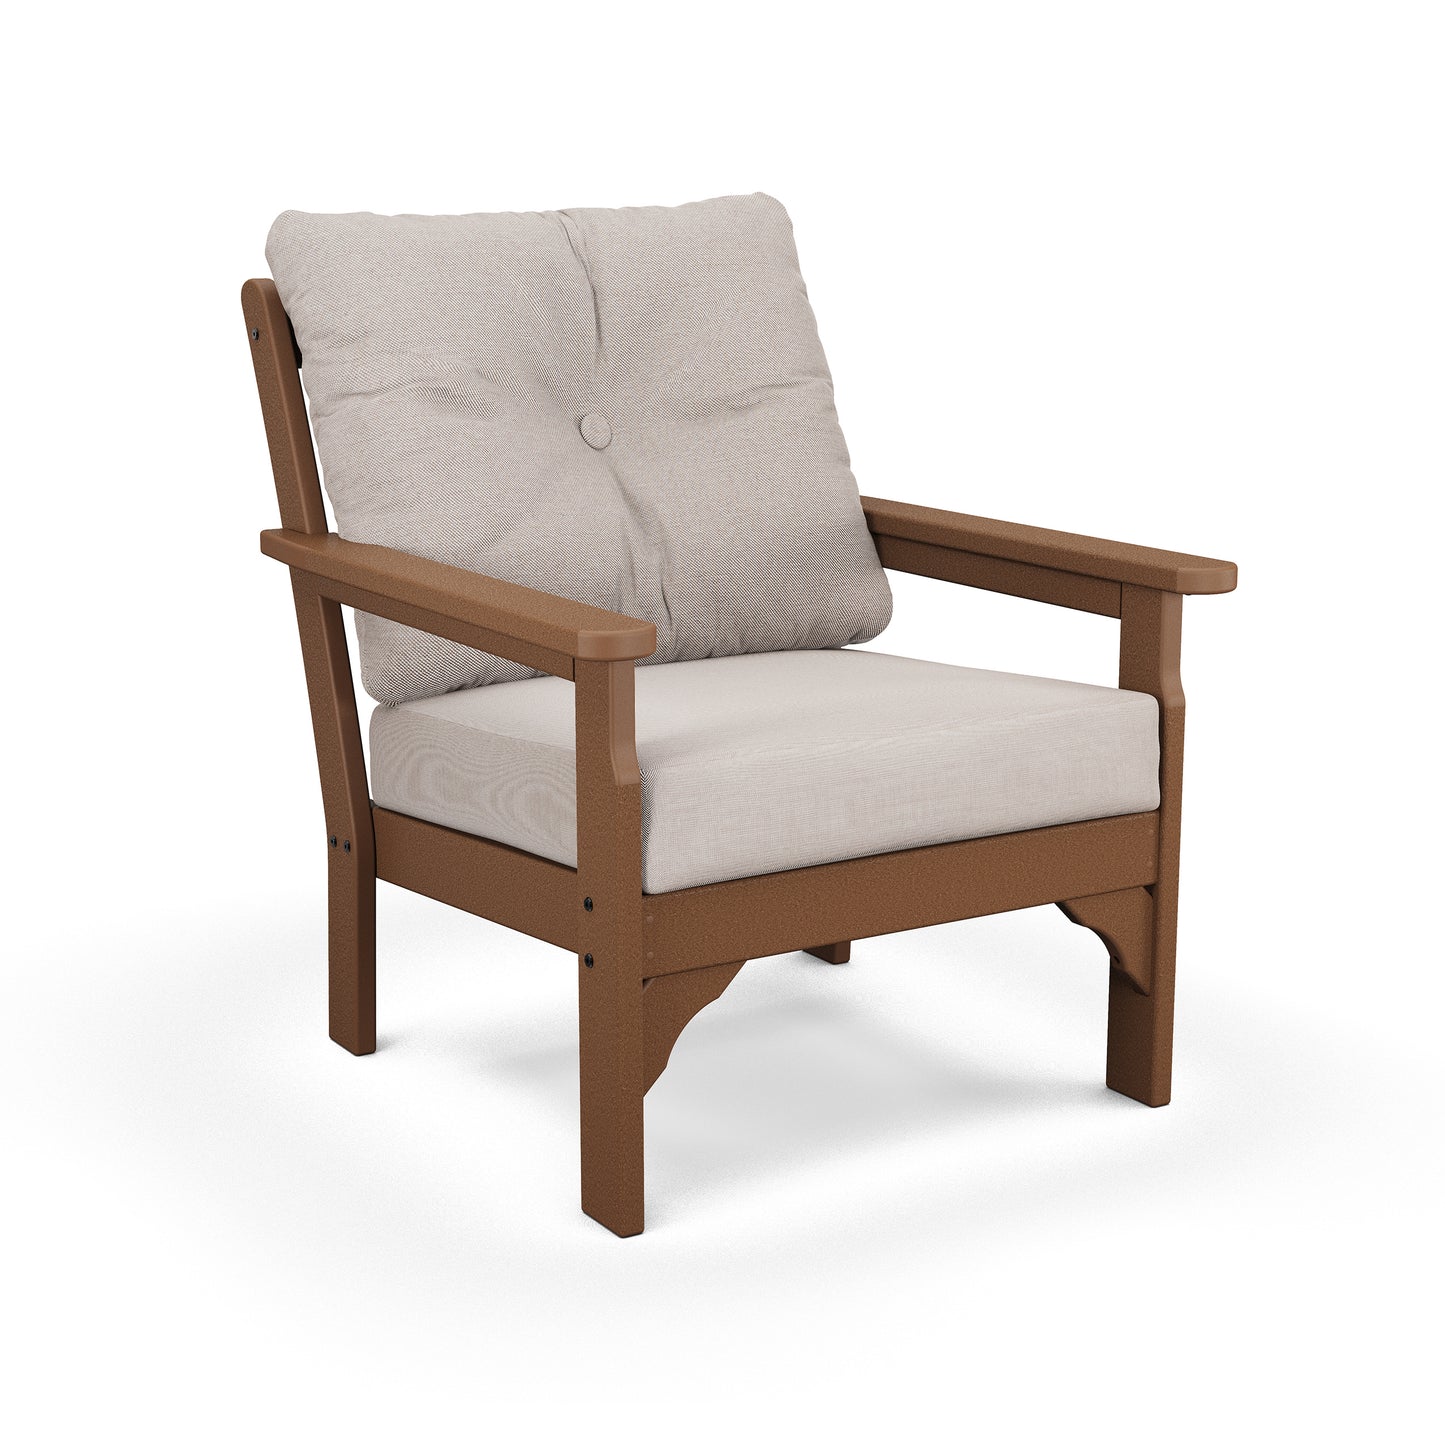 A modern POLYWOOD Vineyard Deep Seating Chair with a brown wooden frame and light beige all-weather fabric cushions on the seat and back, isolated on a white background.